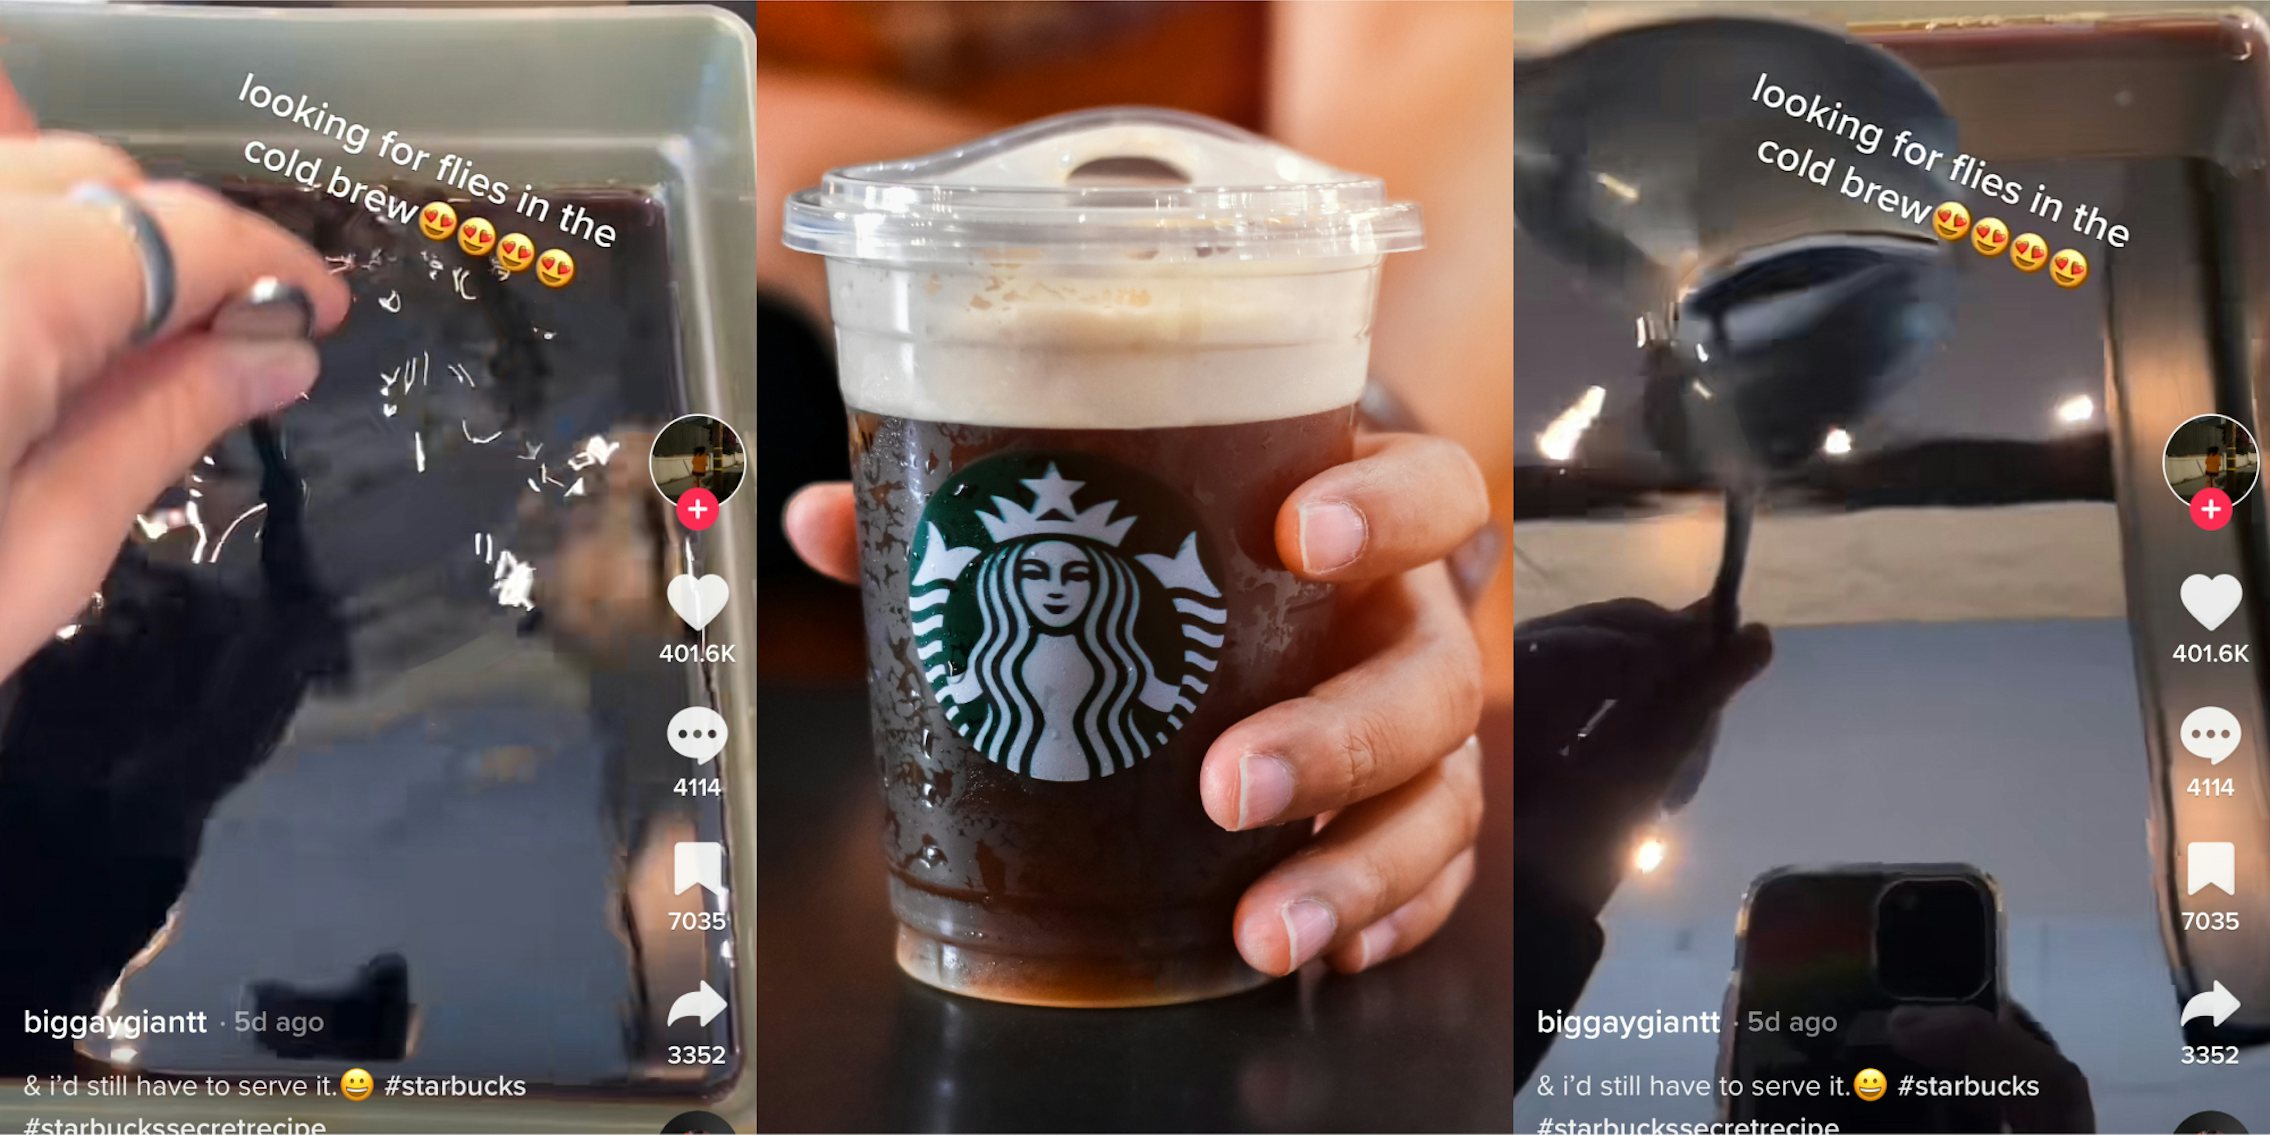 starbucks employee stirs cold brew to look for flies